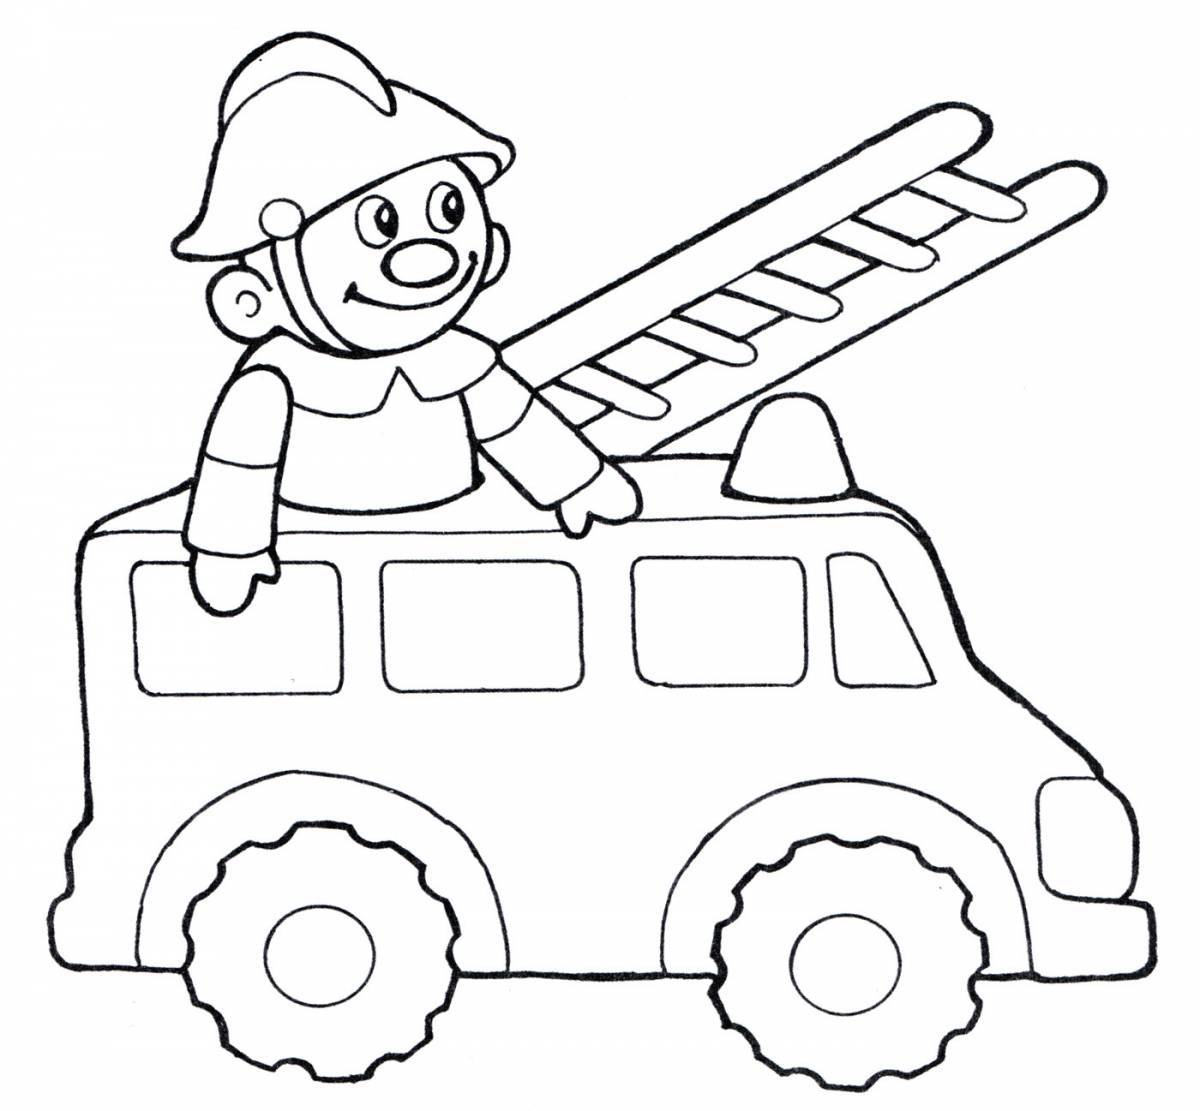 Unique fire truck coloring page for kids